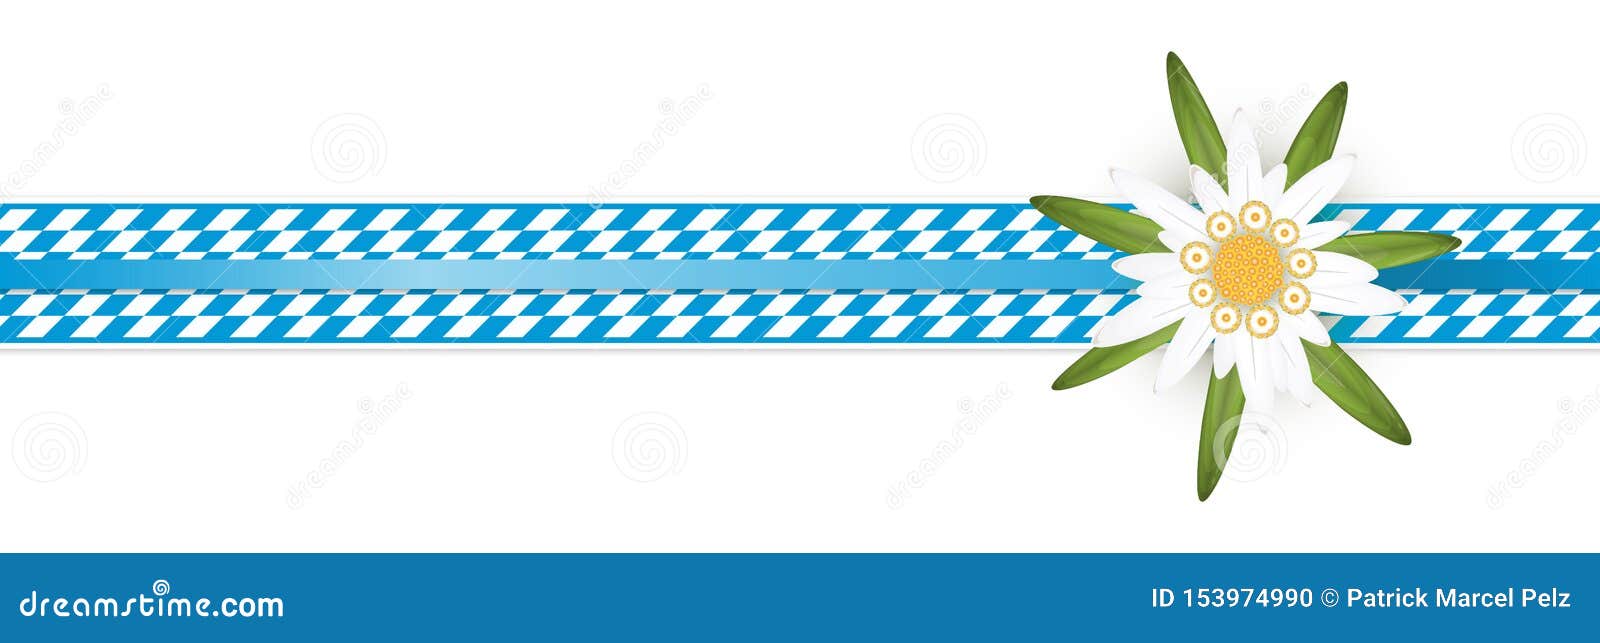 Blue And White Checkered Oktoberfest Banner With Edelweiss Stock